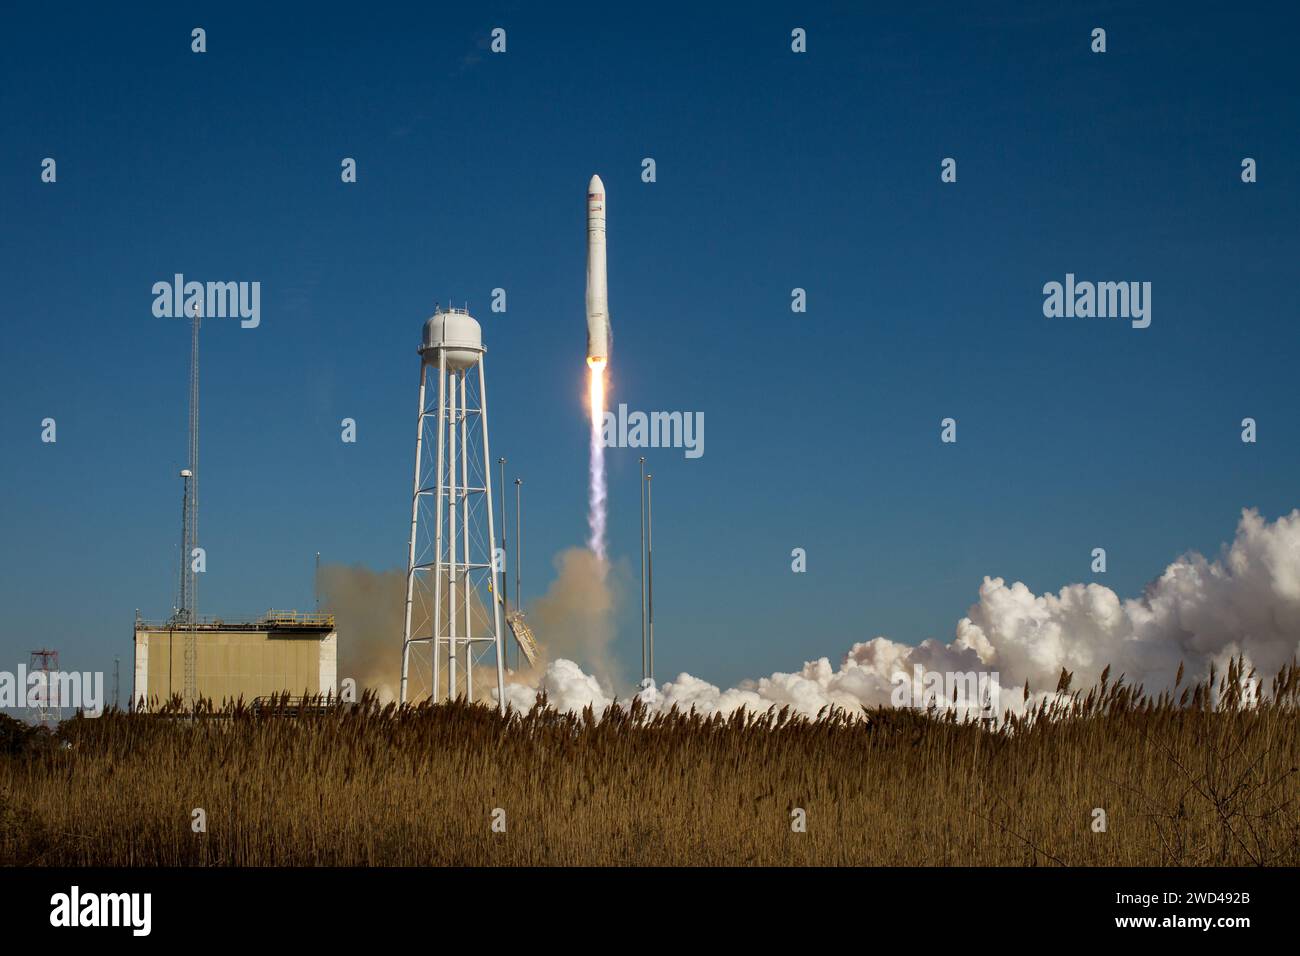 Wallops Island, Virginia, USA. 9th Jan, 2014. An Orbital Sciences Corporation Antares rocket is seen as it launches from Pad-0A at NASA's Wallops Flight Facility, Thursday, January 9, 2014, Wallops Island, VA. Antares is carrying the Cygnus spacecraft on a cargo resupply mission to the International Space Station. The Orbital-1 mission is Orbital Sciences' first contracted cargo delivery flight to the space station for NASA. Cygnus is carrying science experiments, crew provisions, spare parts and other hardware to the space station. (Credit Image: © Bill Ingalls/NASA/ZUMA Press Wire) EDITO Stock Photo